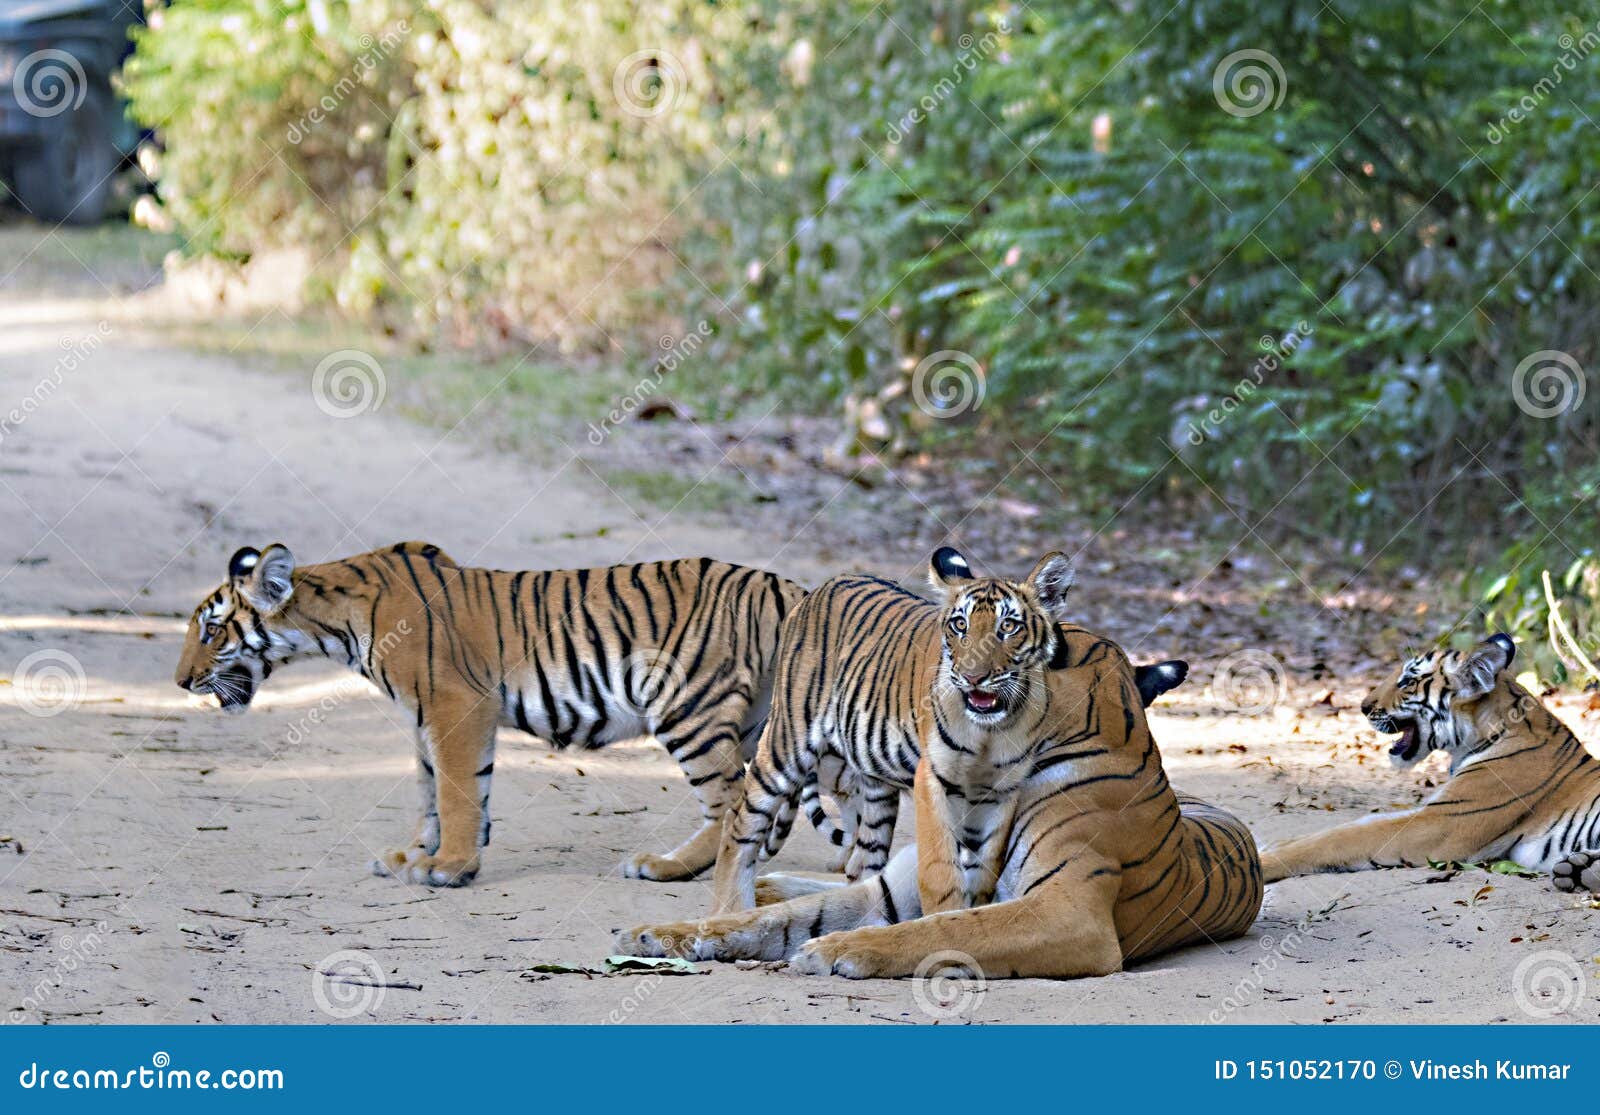 tigress with cubs resting in the forest of jim corbett